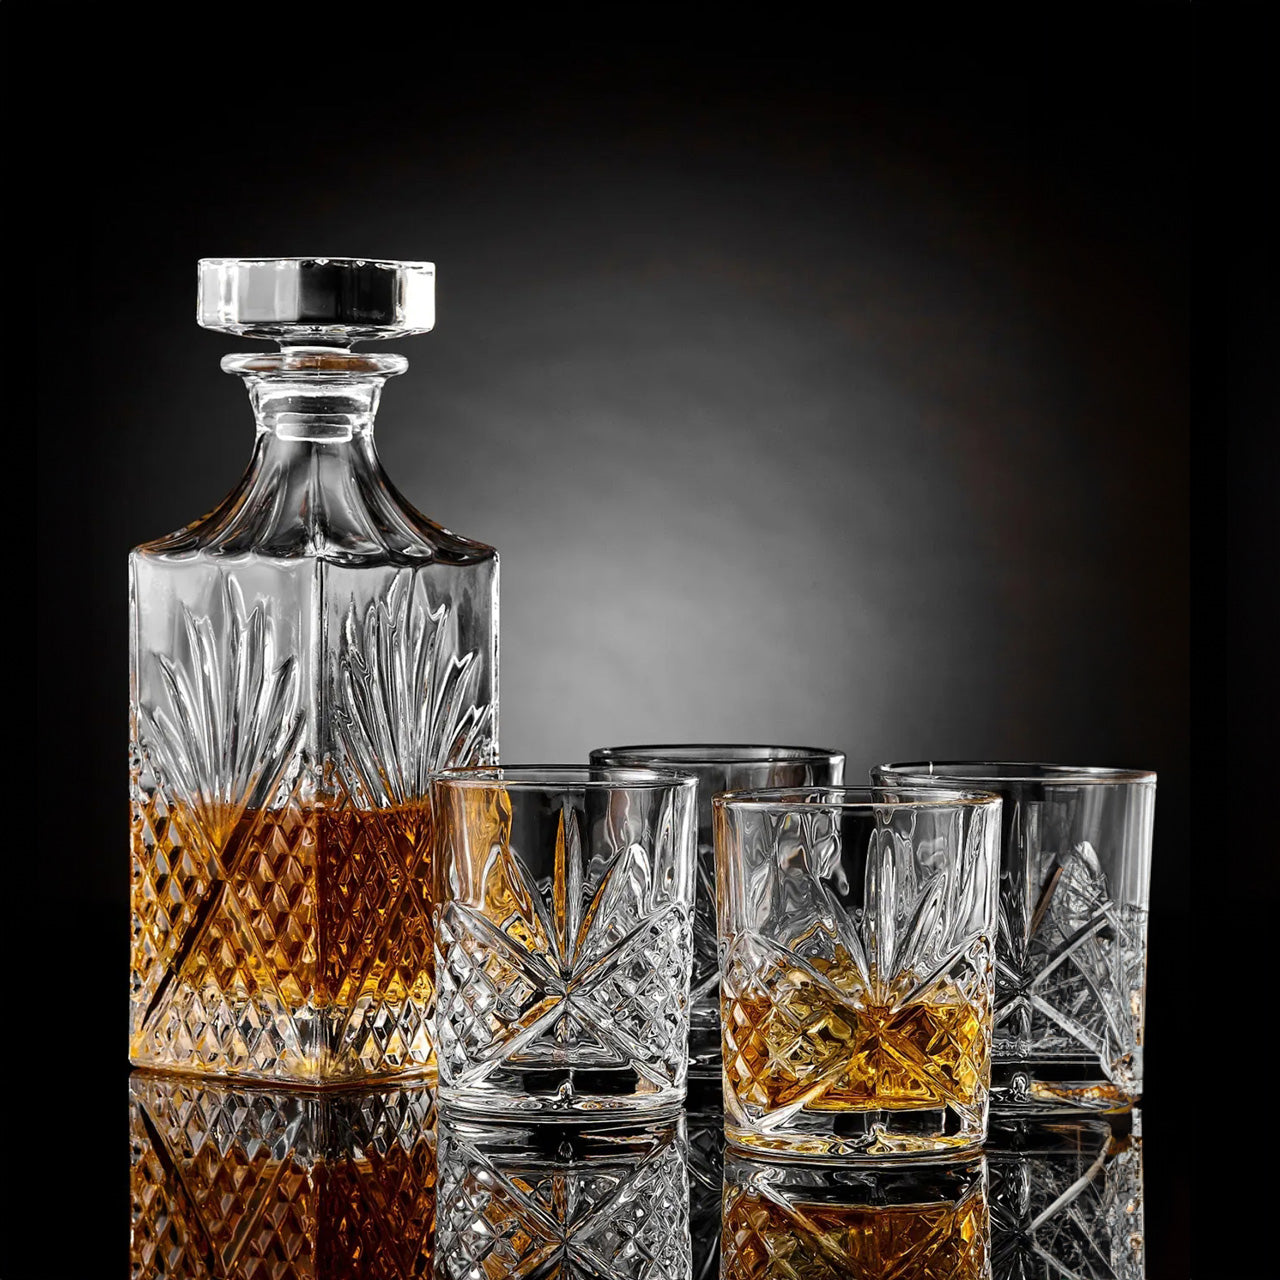 Ophelia 5 Piece Whiskey Set with decanter and glasses with drinks